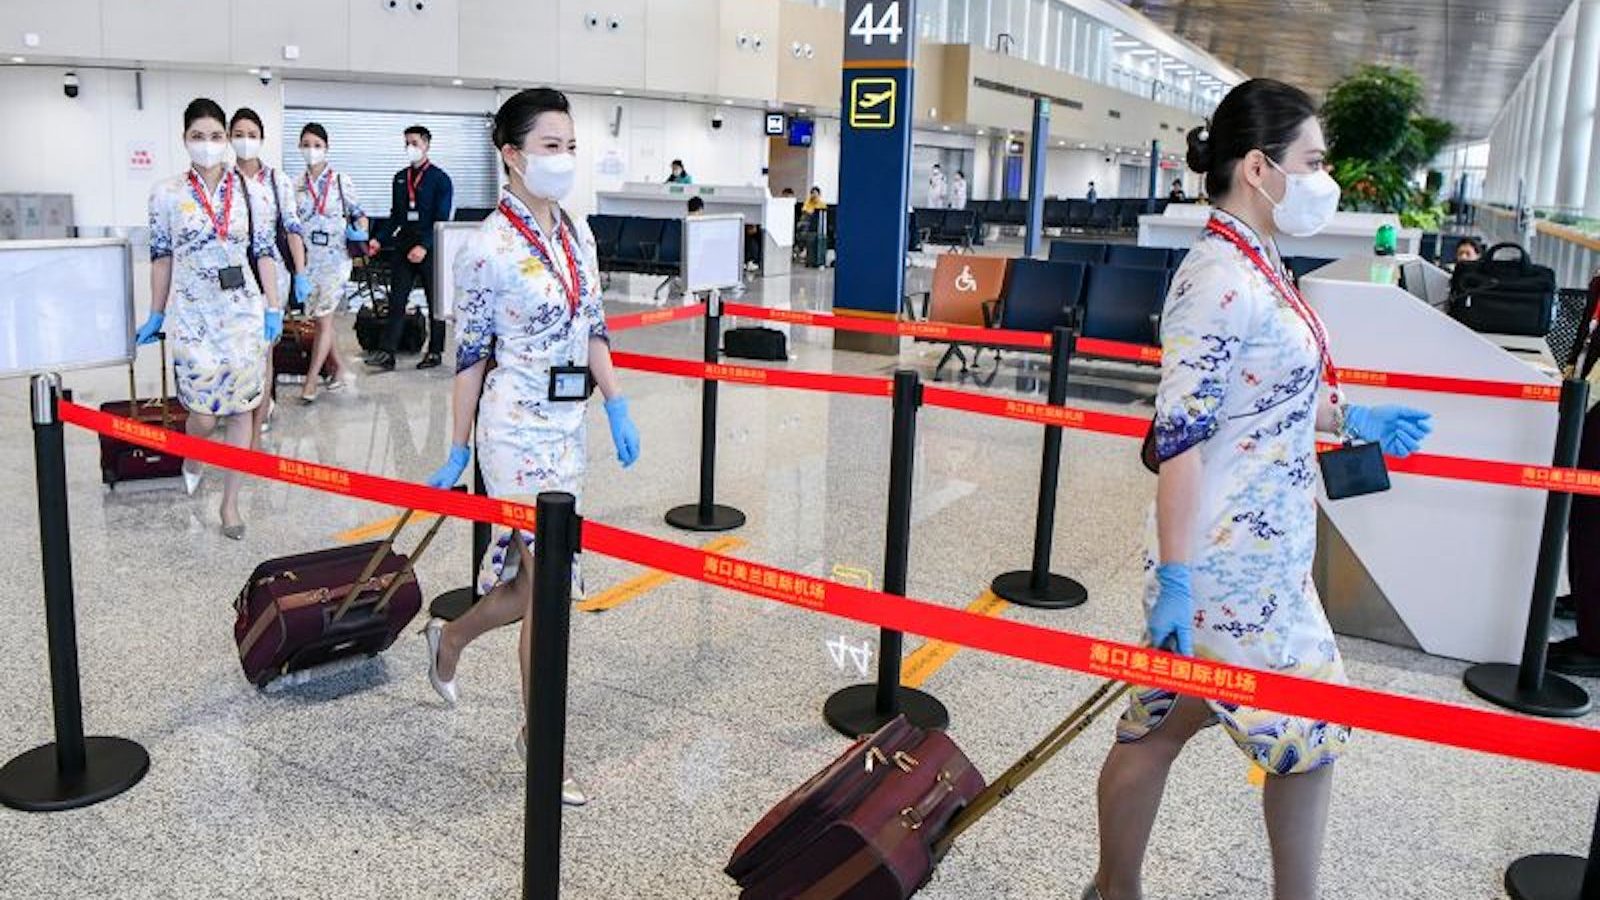 Hainan Airlines flight attendants prepare to board a flight at Haikou Meilan International Airport in Haikou, China, March 17.